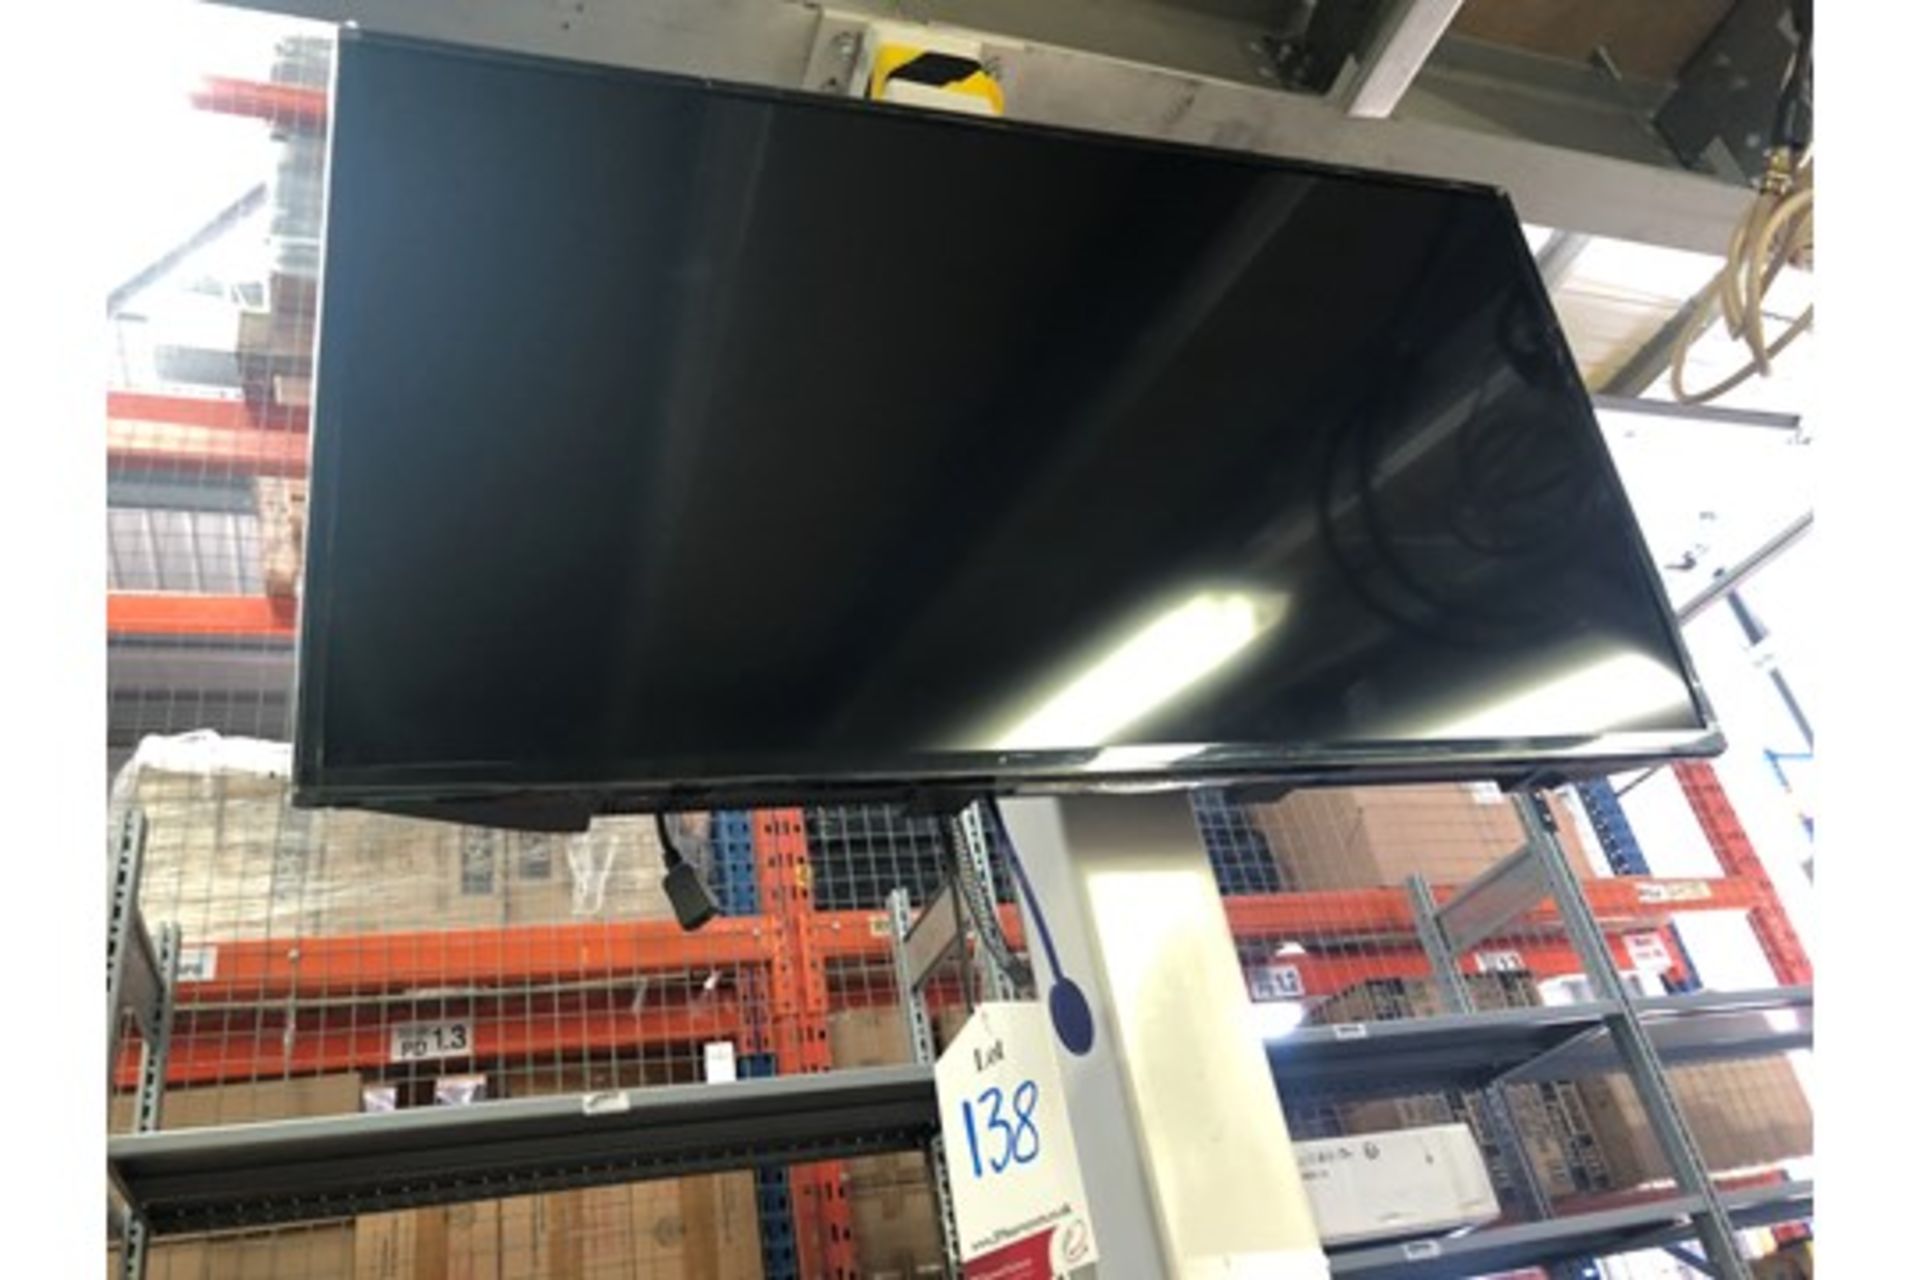 Blaupunkt 40" LCD screen with wall mounting bracket